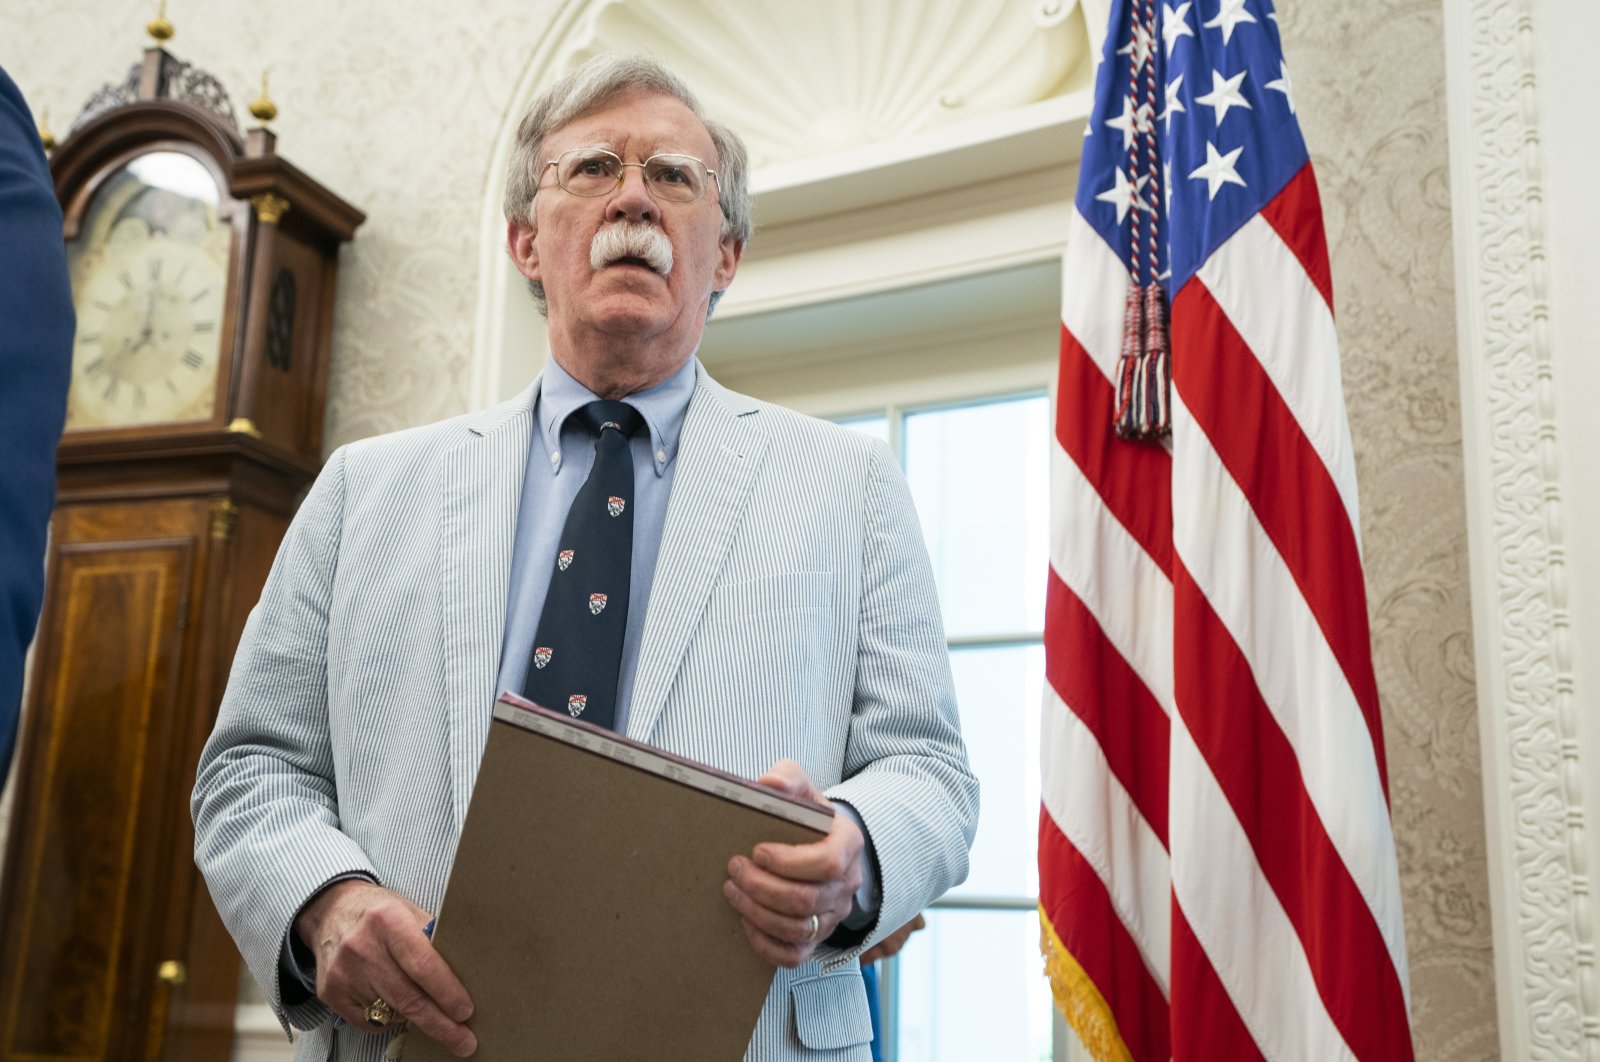 National Security Advisor John Bolton looks on in the Oval Office of the White House in Washington, D.C., U.S., July 19, 2019. (EPA-EFE Photo)